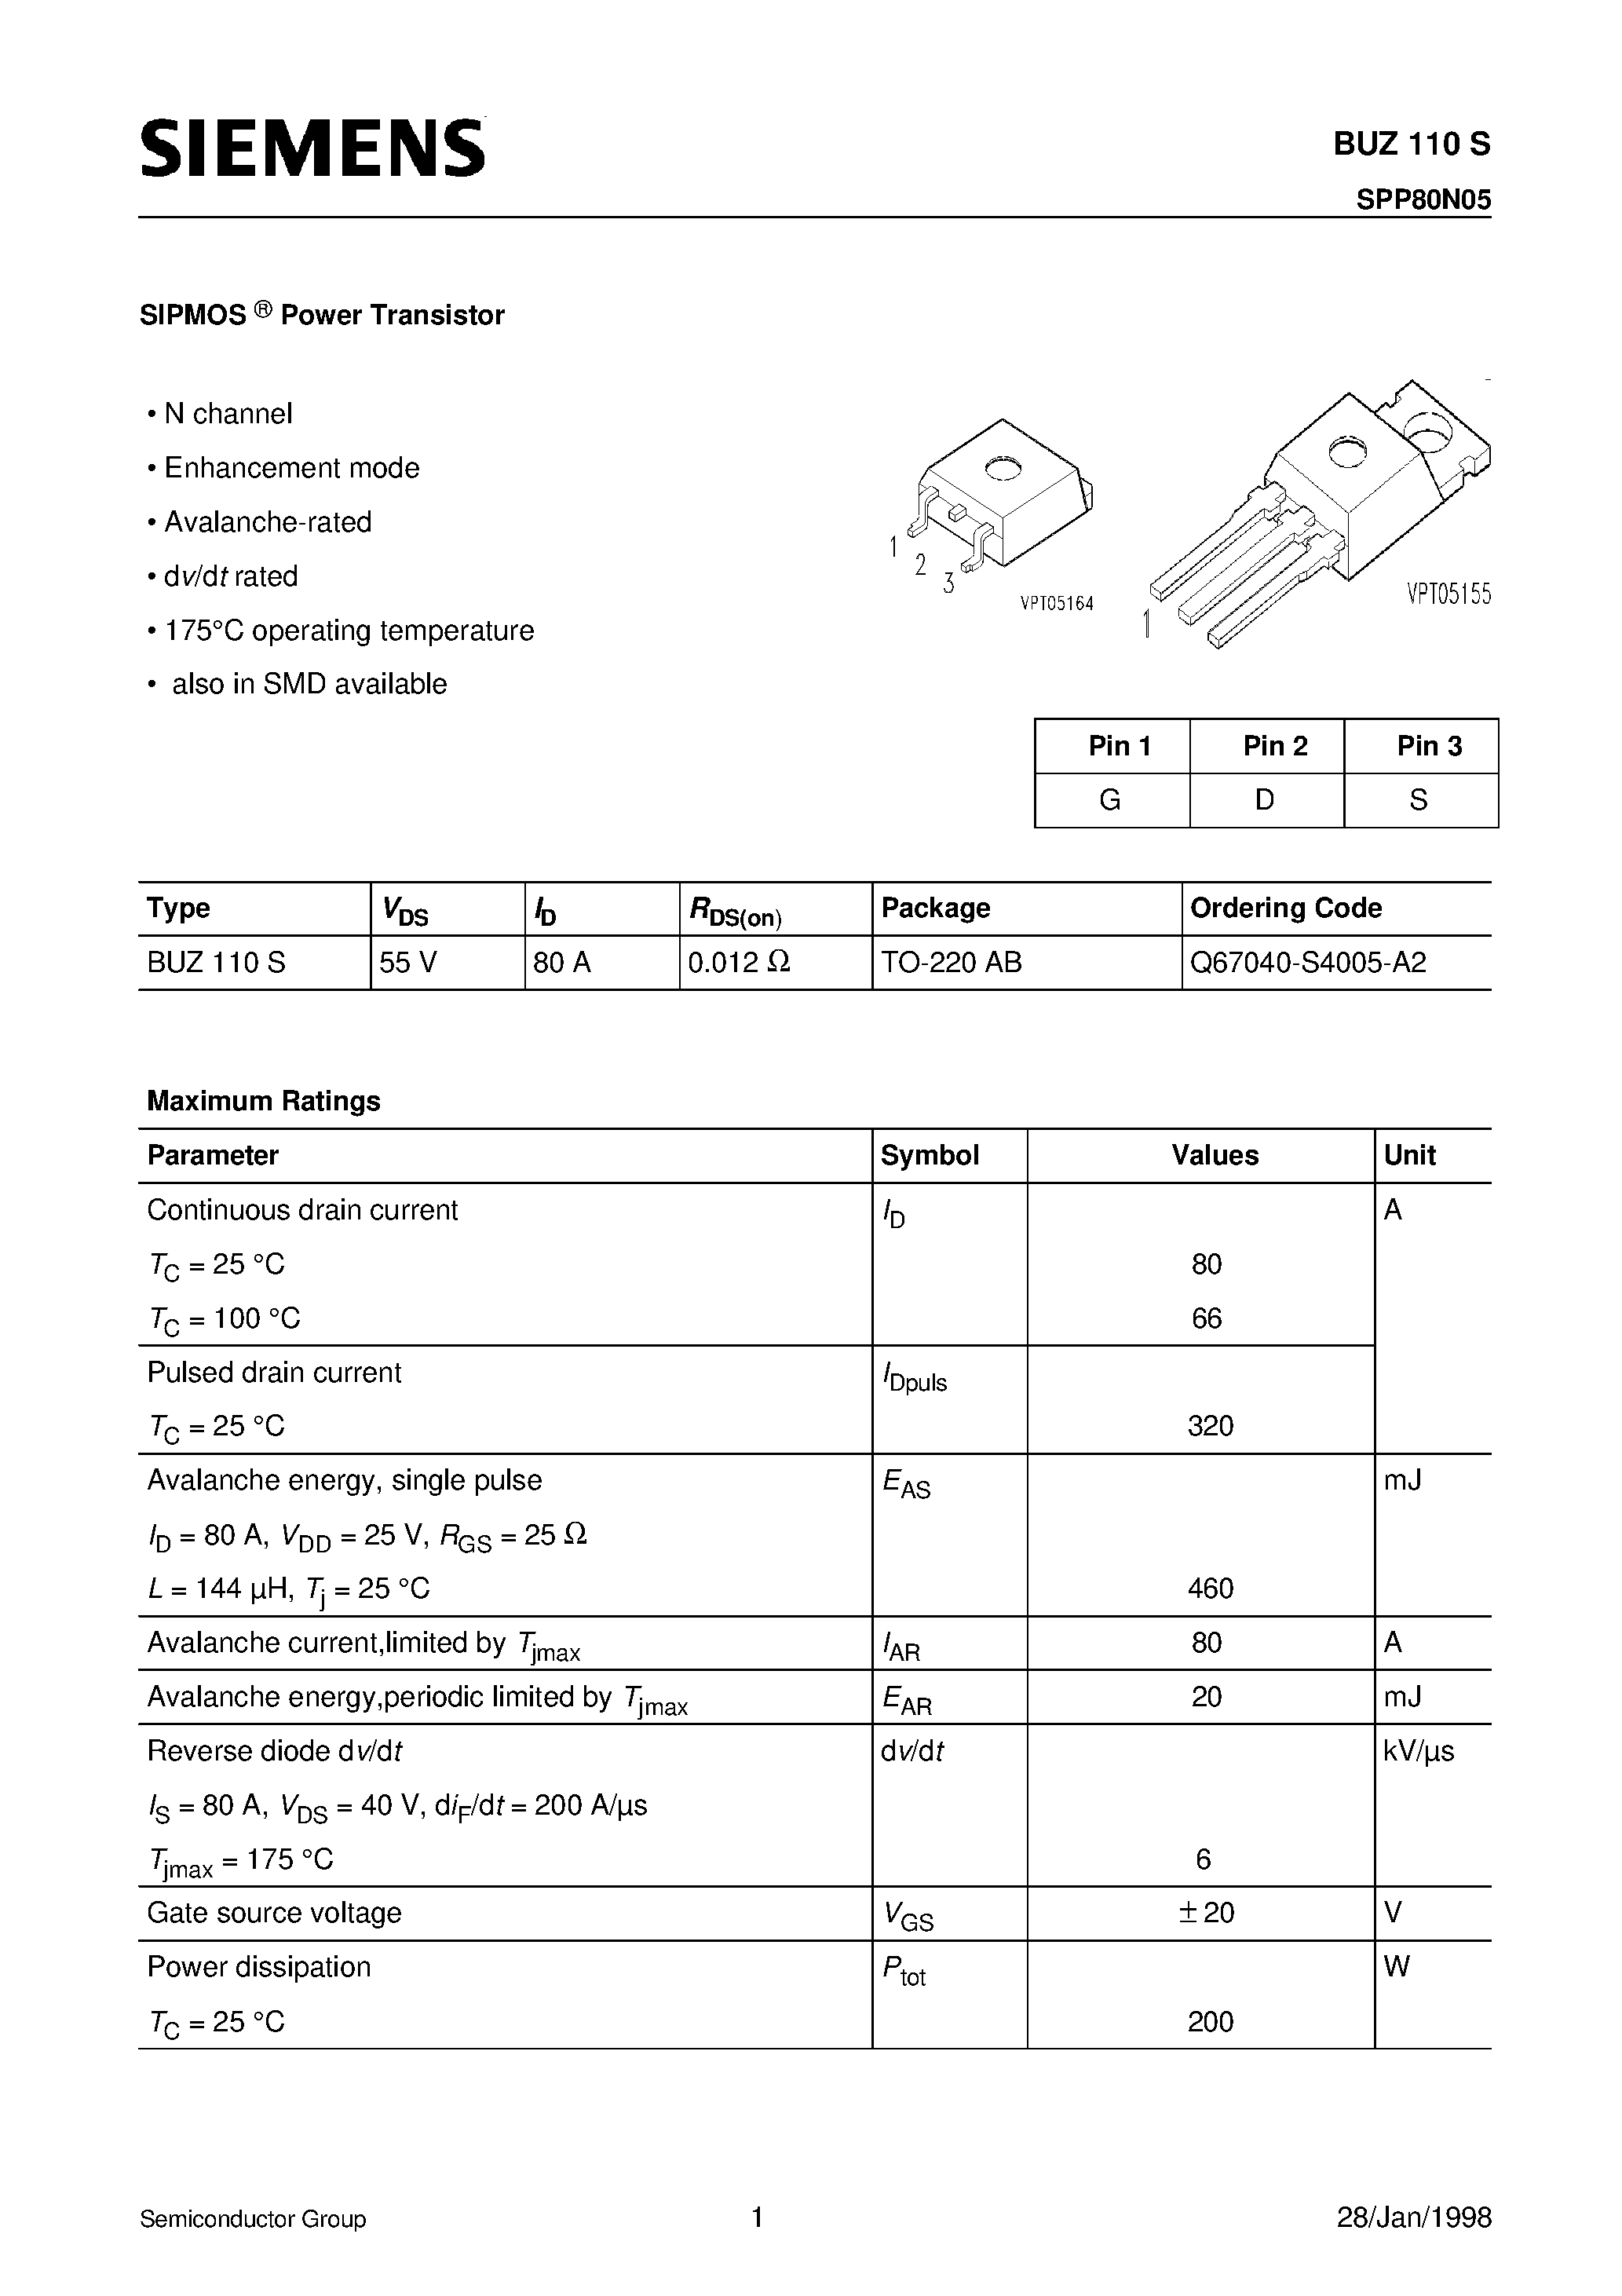 Datasheet BUZ110S - SIPMOS Power Transistor (N channel Enhancement mode Avalanche-rated dv/dt rated) page 1